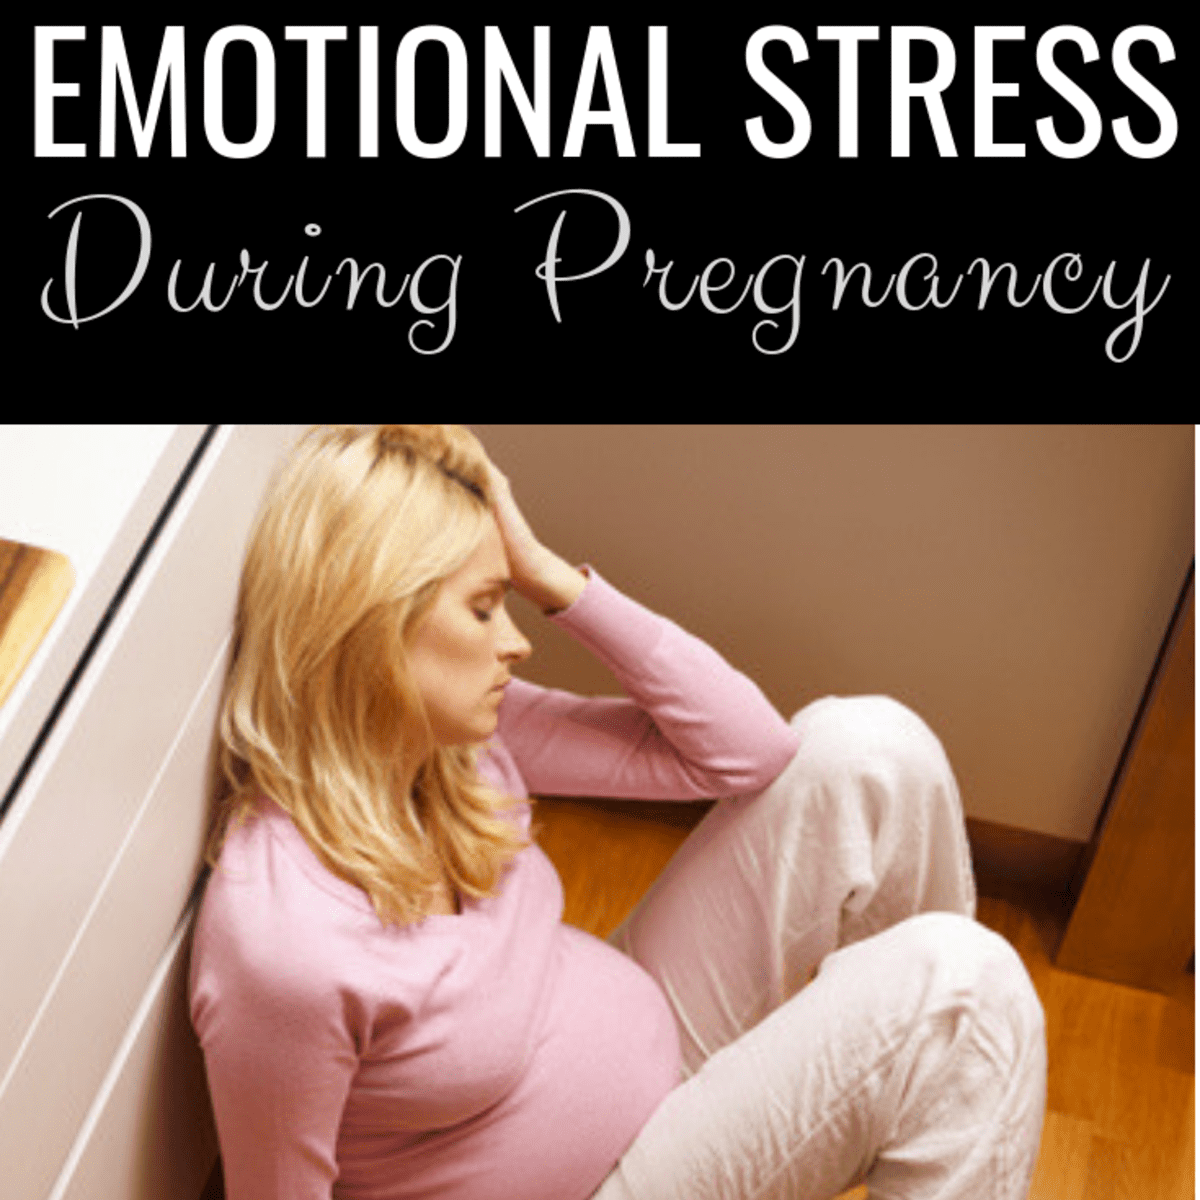 How To Avoid Stress During Pregnancy Tomorrowfall9 